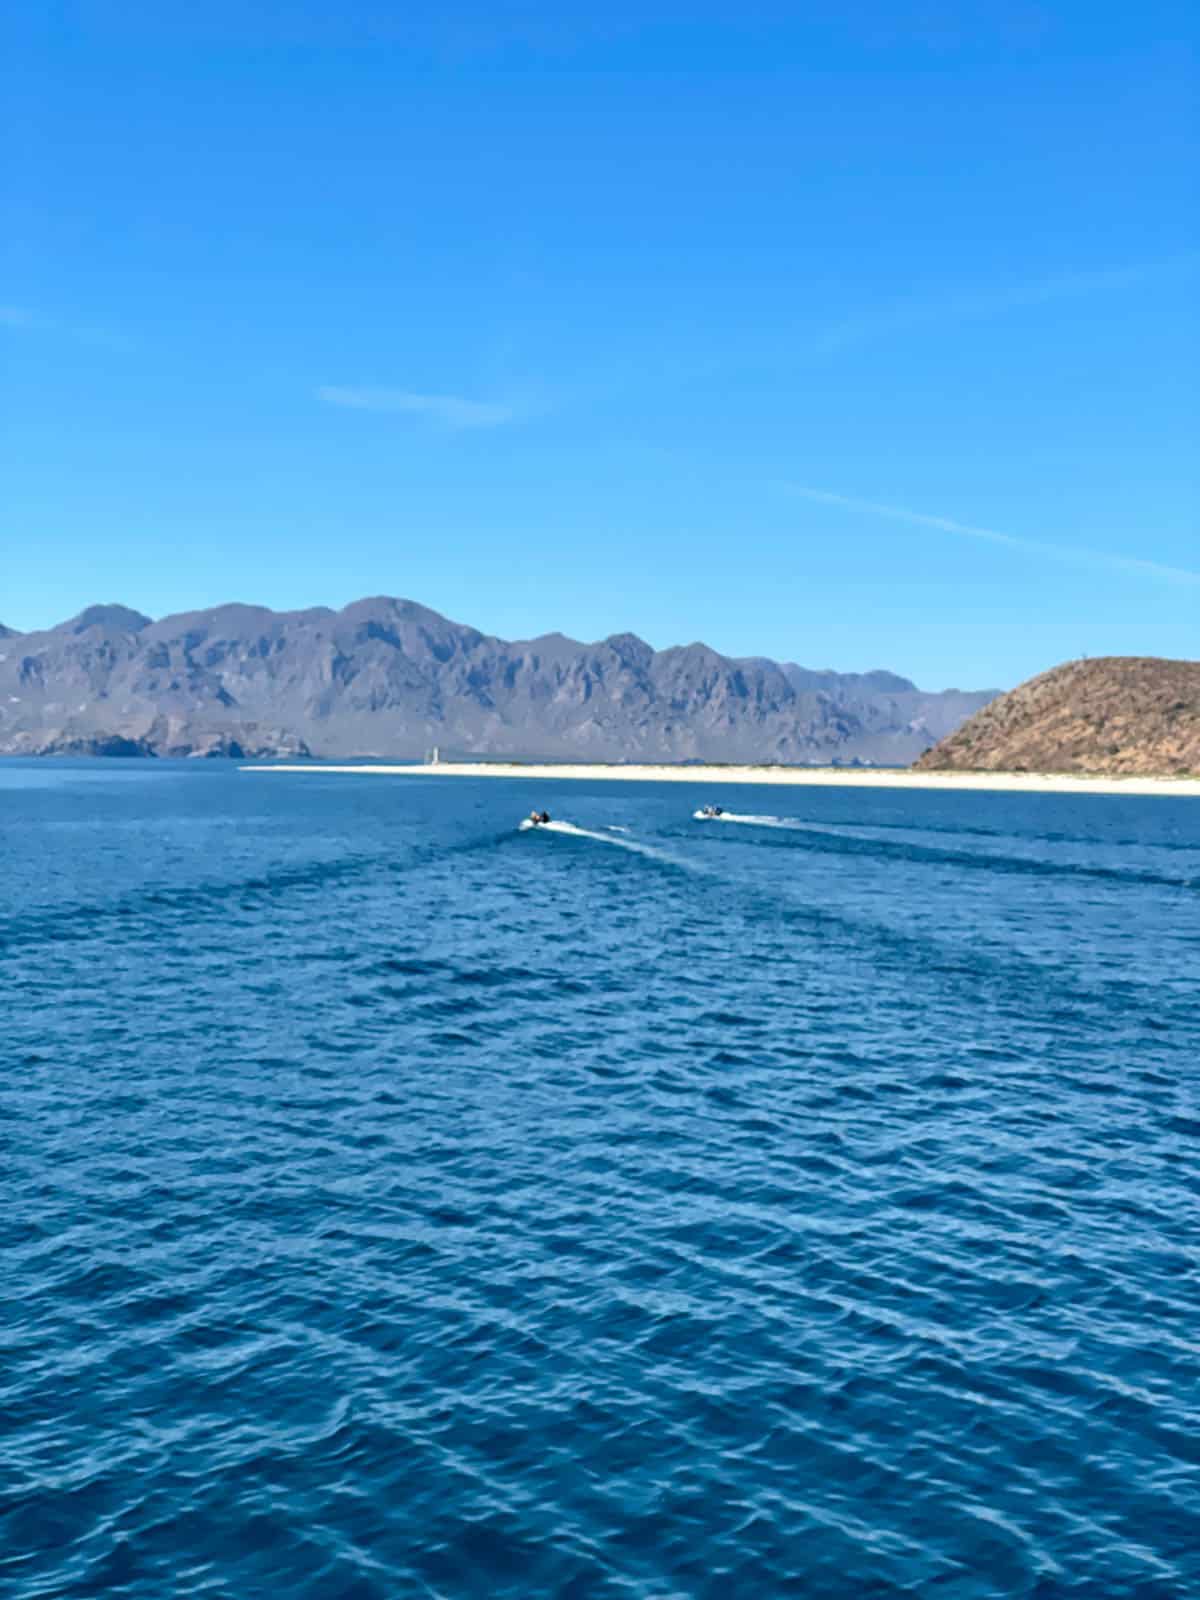 Skiffs heading to shore in Baja Mexico with mountains in background.